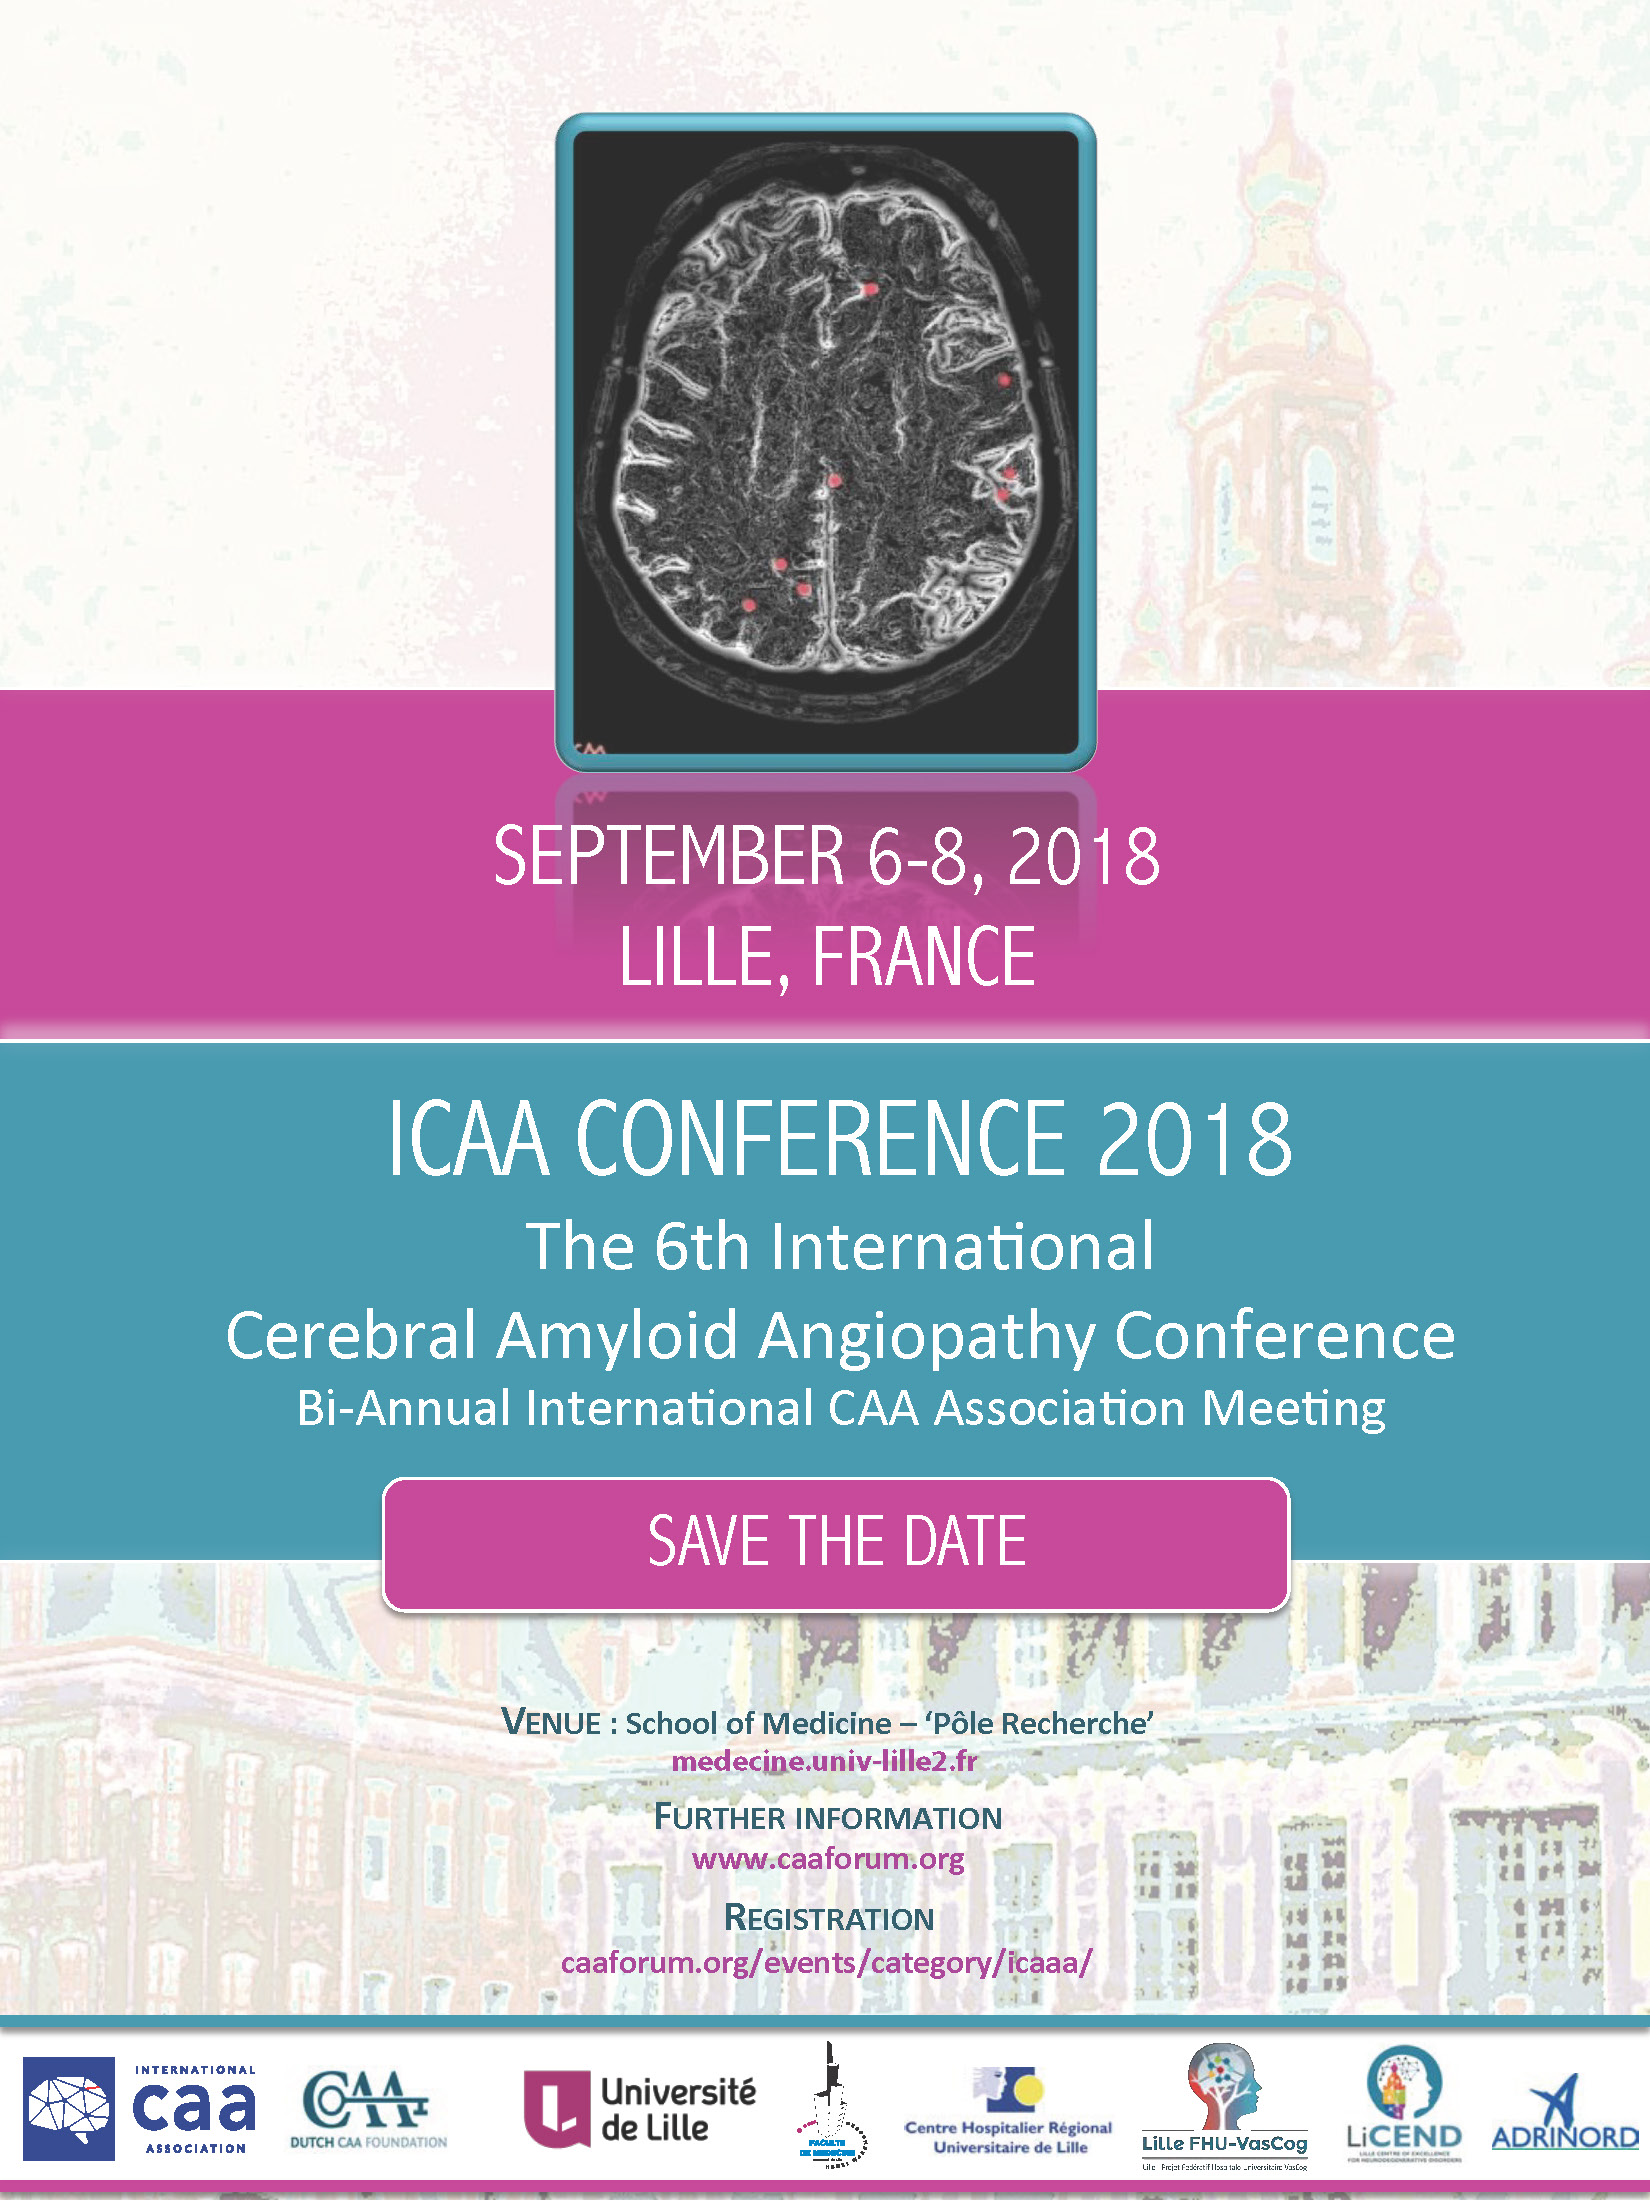 ICAA  CONFERENCE 2018 - CONGRES D'EPILEPTOLOGIE - LILLE 